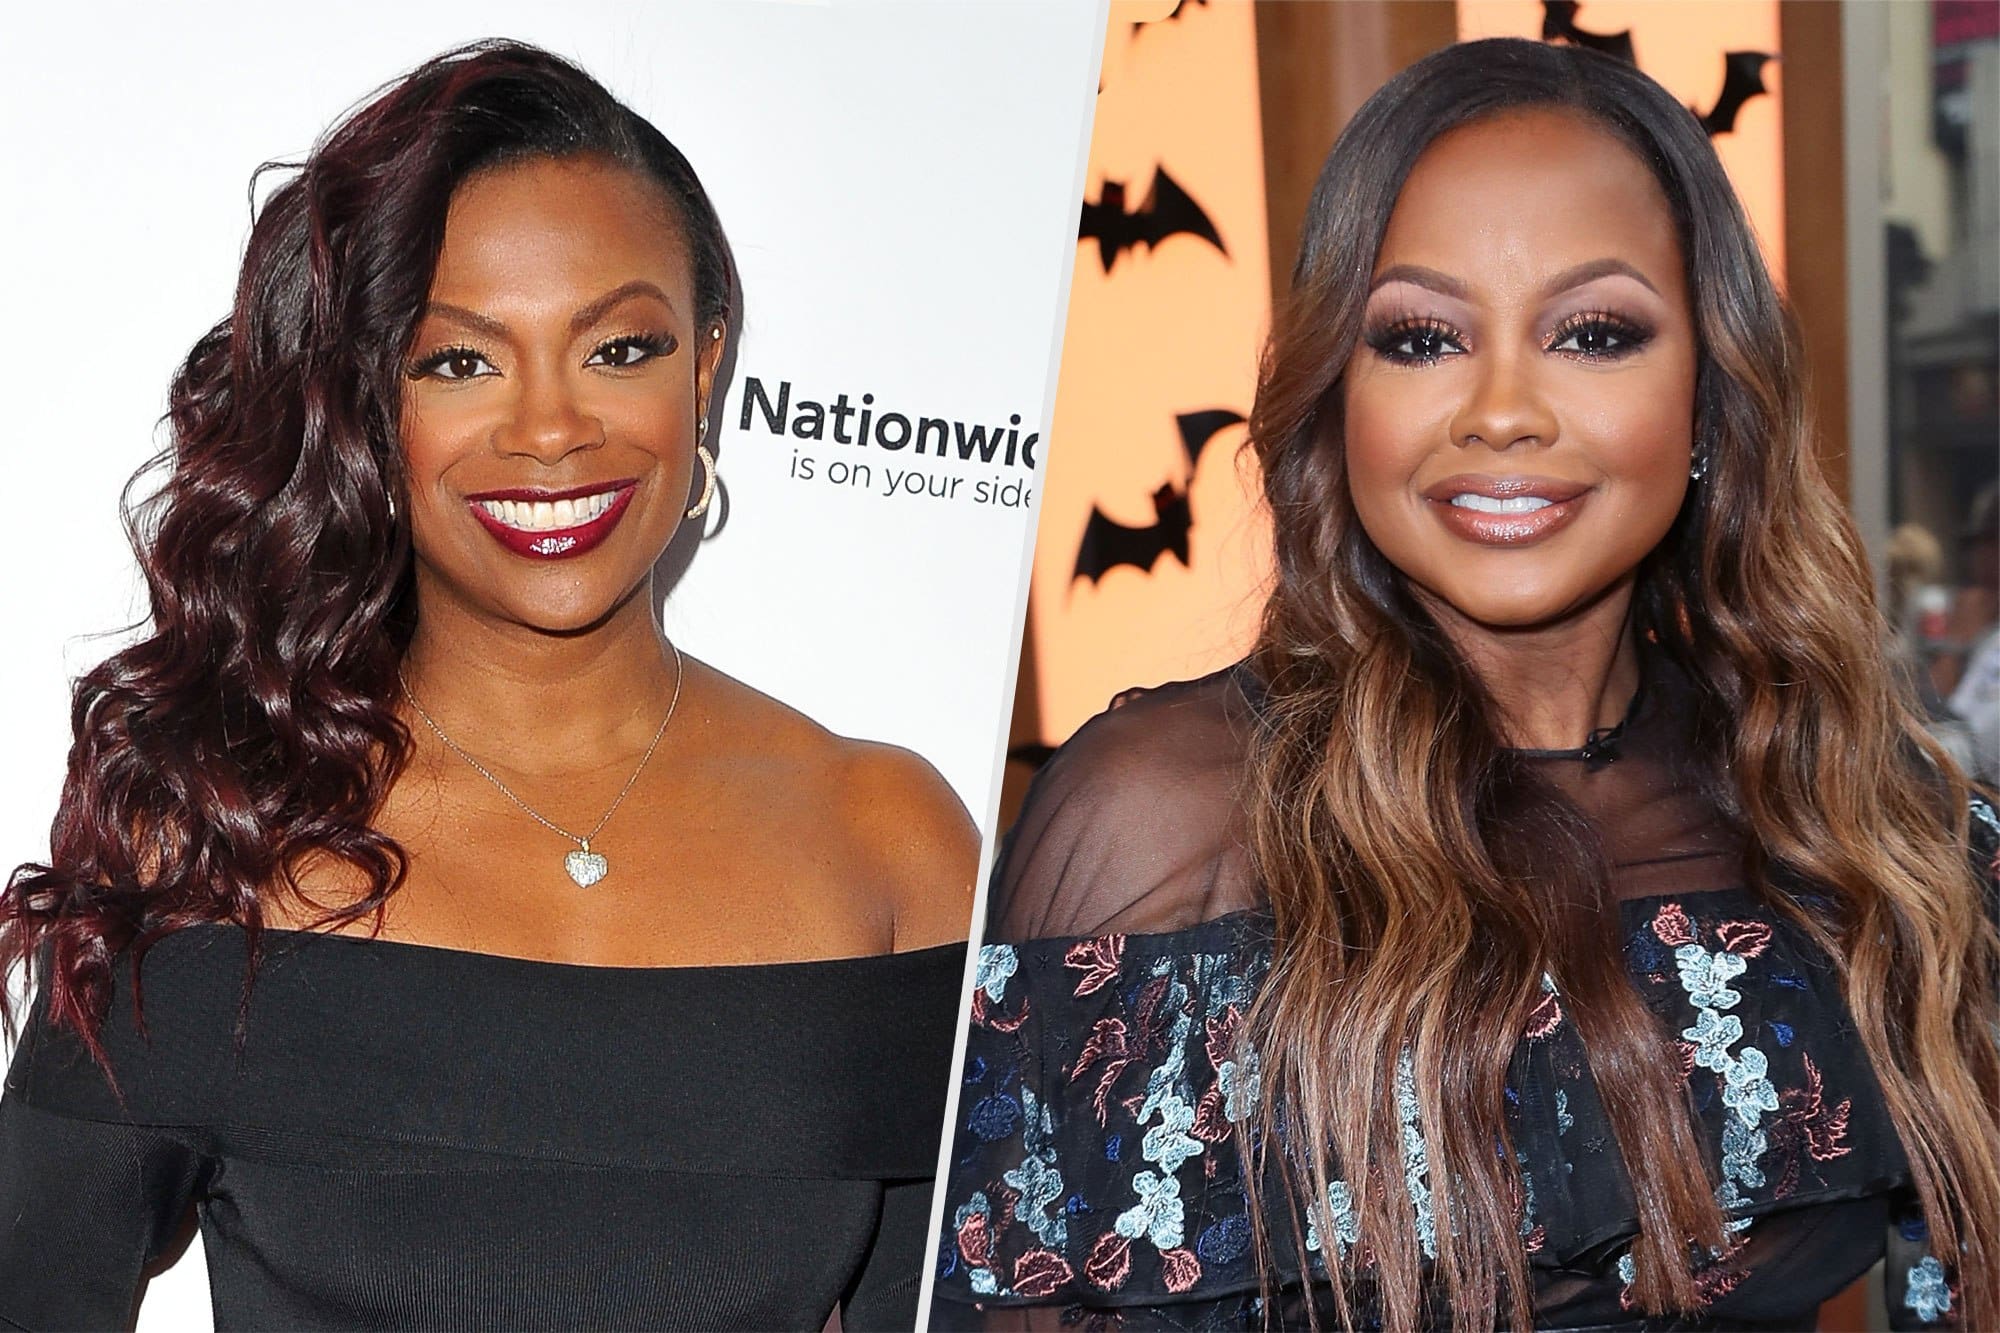 Phaedra Parks Tells Her Fans Not To Take Life For Granted - People Ask Her To Make Up With Kandi Burruss